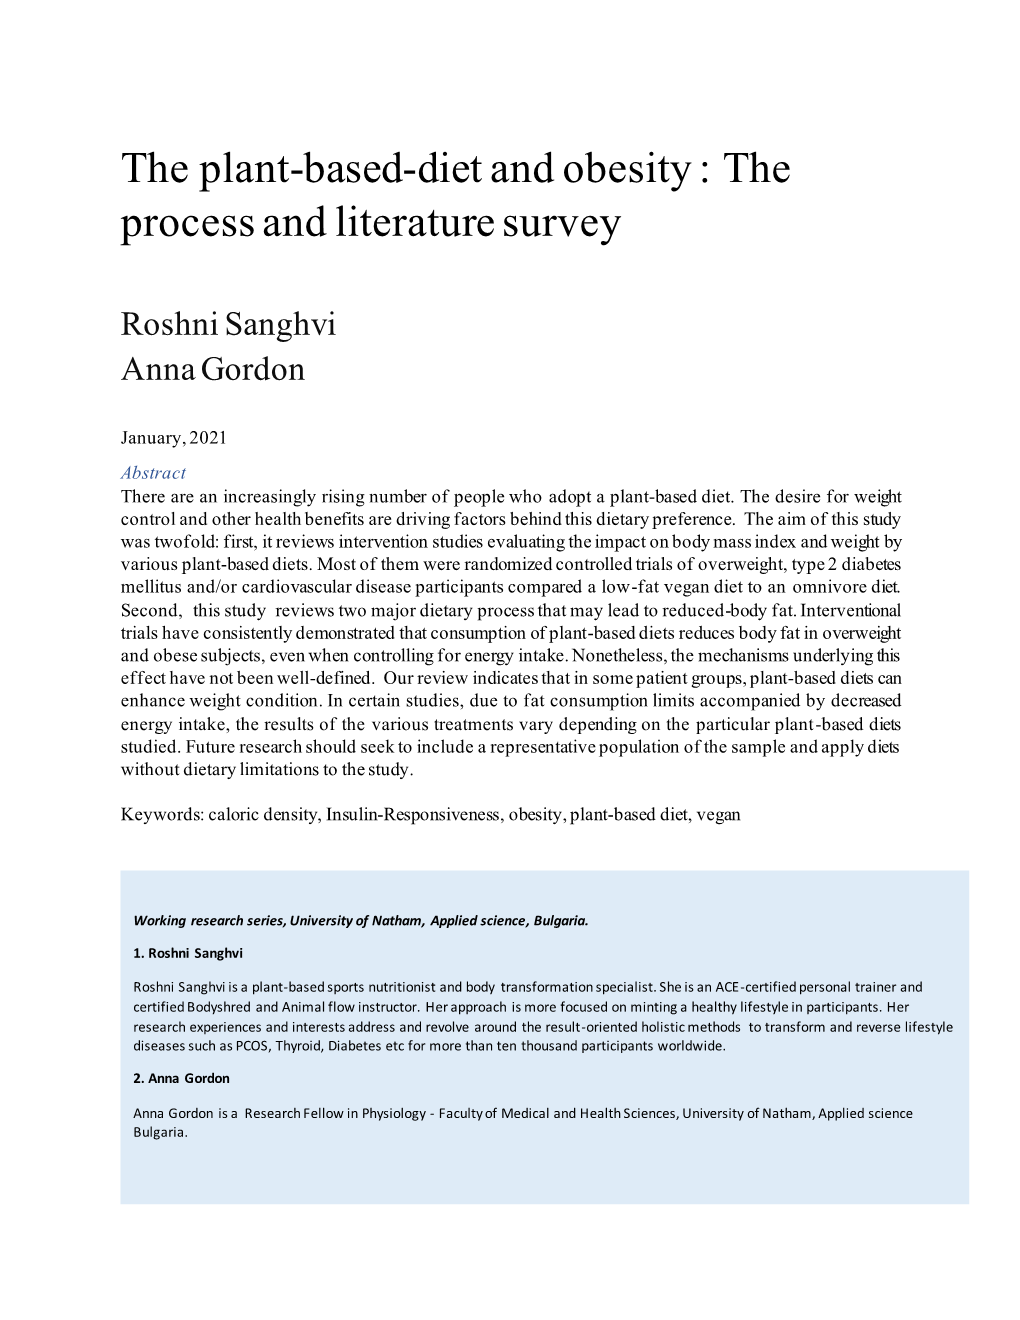 The Plant-Based-Diet and Obesity : the Process and Literature Survey